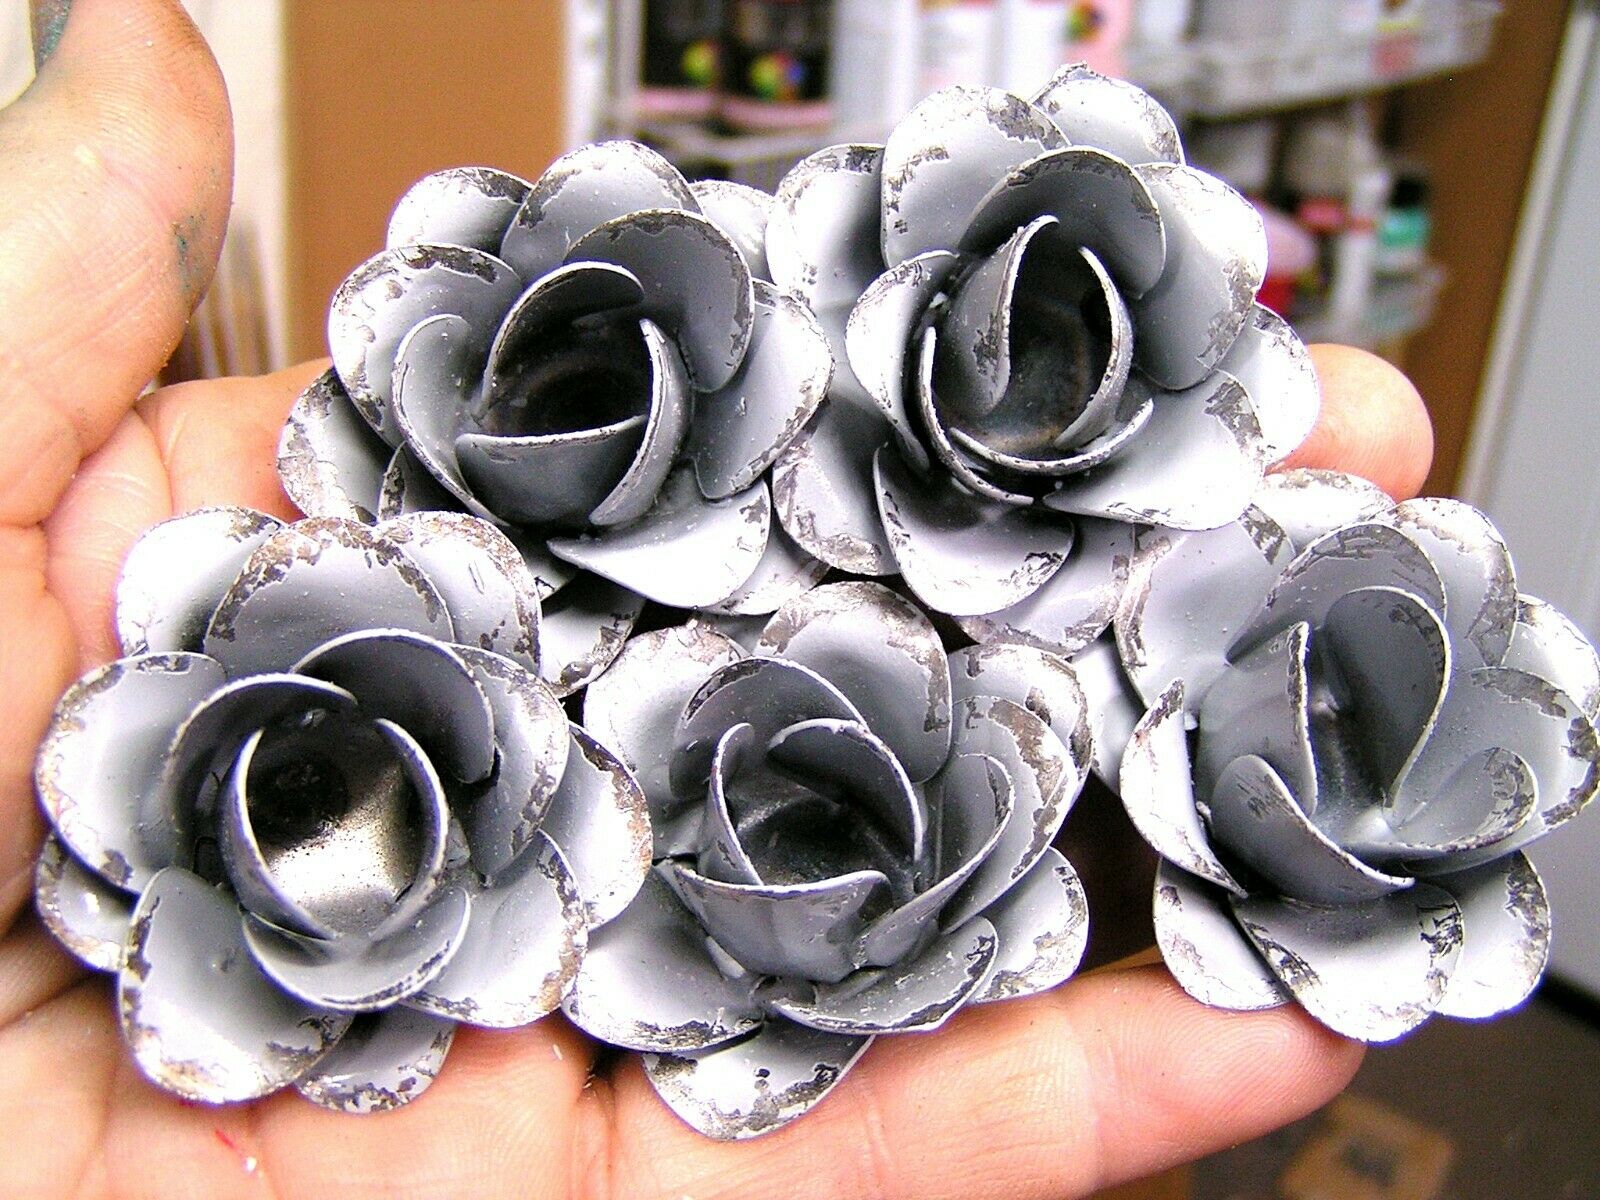 Five Medium Grey Roses Metal Flowers For Crafts, Jewelry, Embellishments Accents